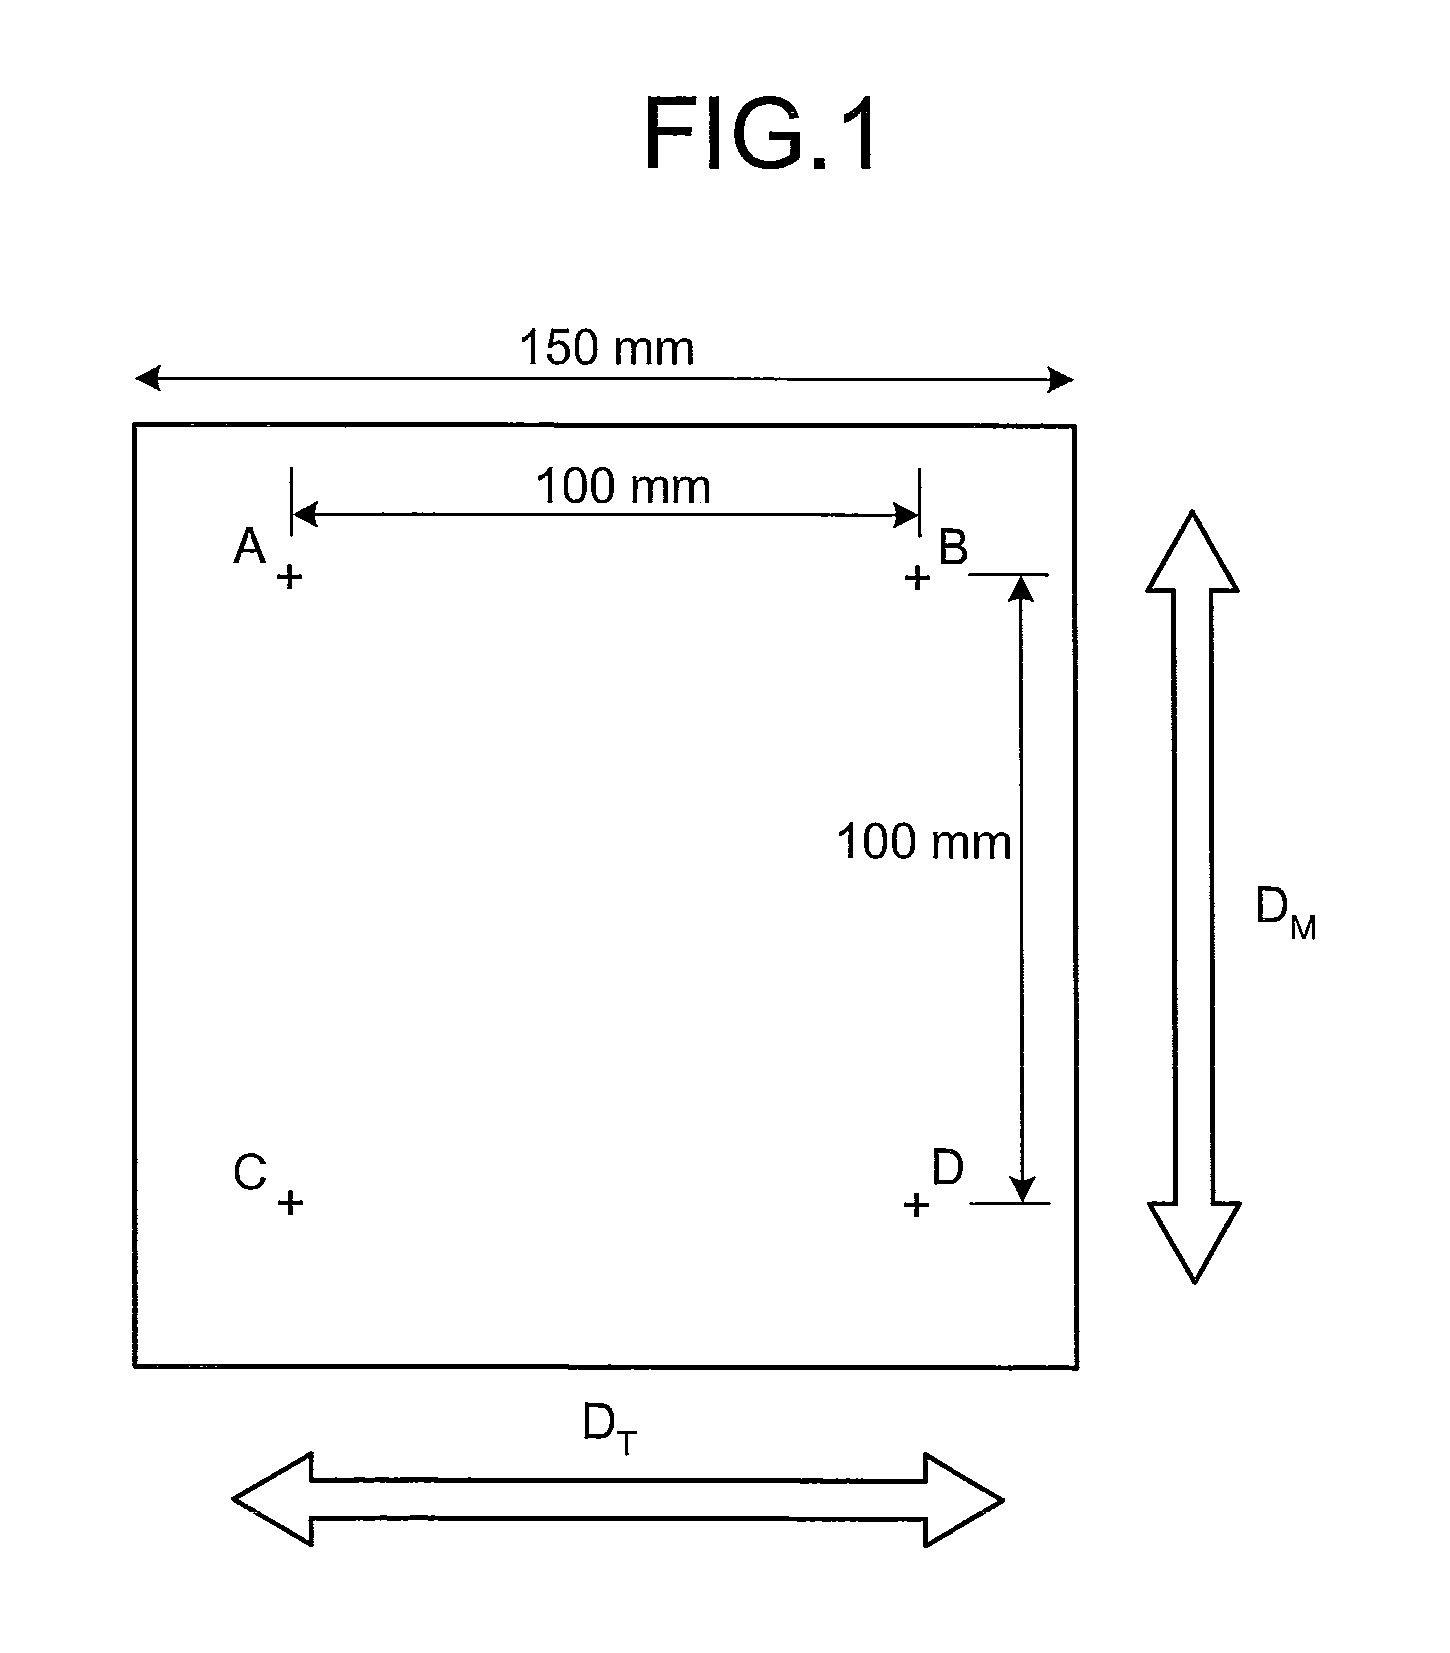 Display screen protection film and polarization plate